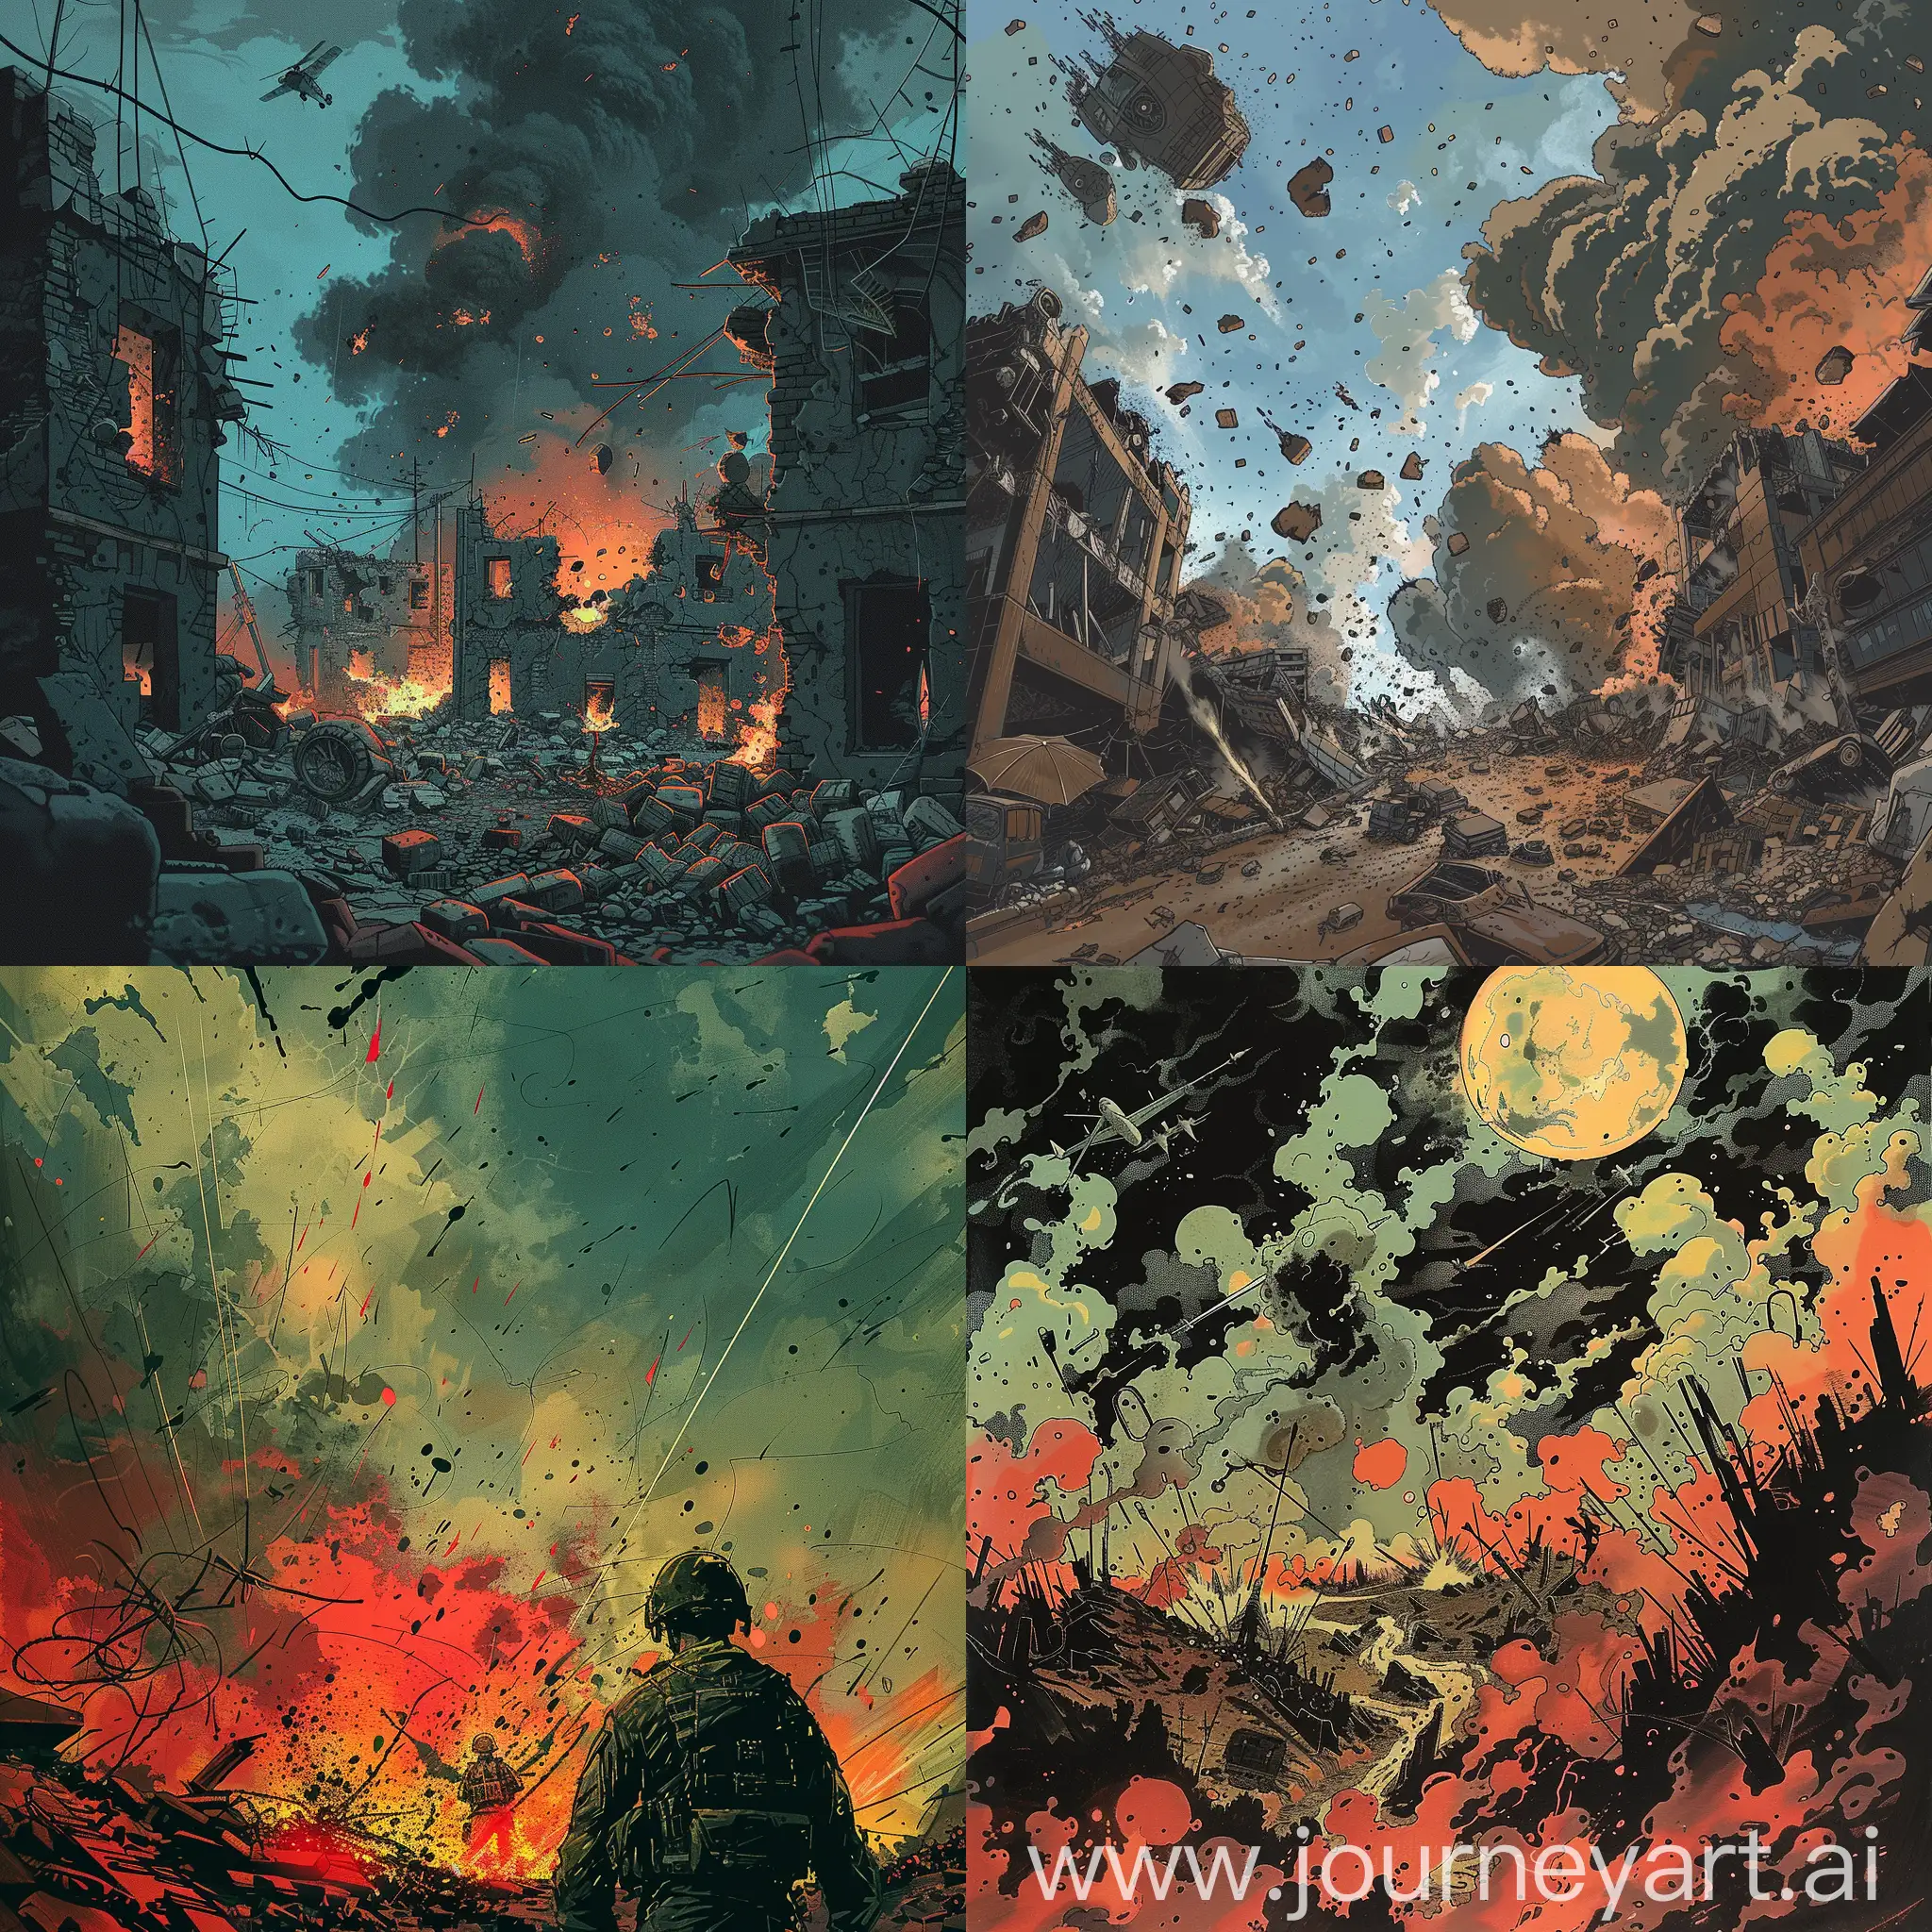 Abstract-Modern-Warfare-Battle-Aftermath-in-Comics-Style